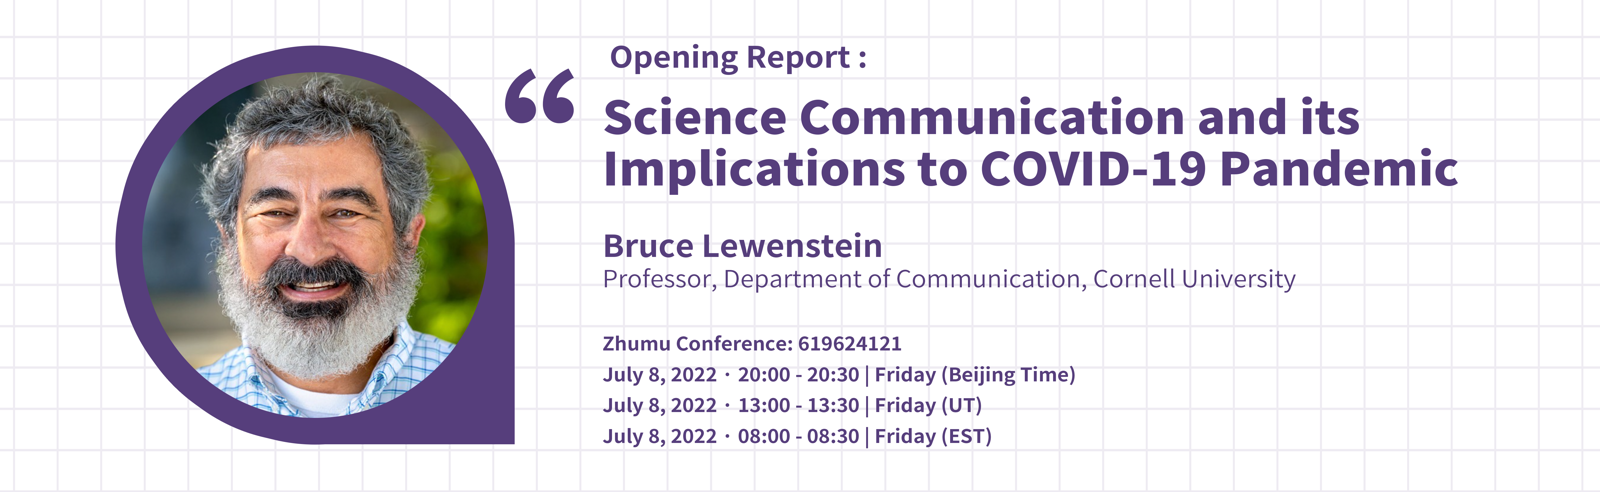 Opening report: Science communication and its implications to COVID-19 pandemic